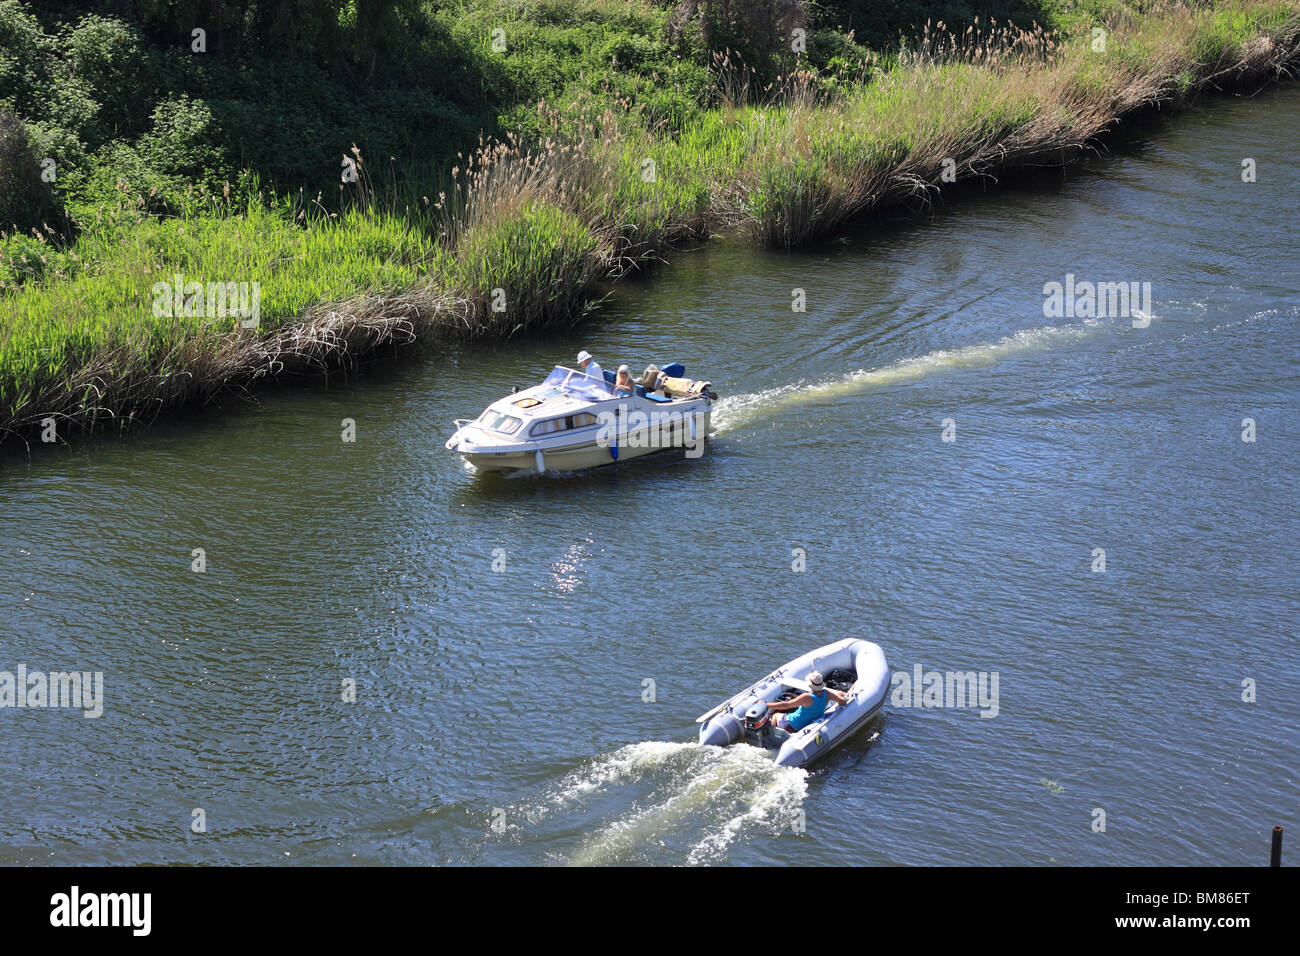 cabin cruiser and inflatable dinghy on River Stour Stock Photo